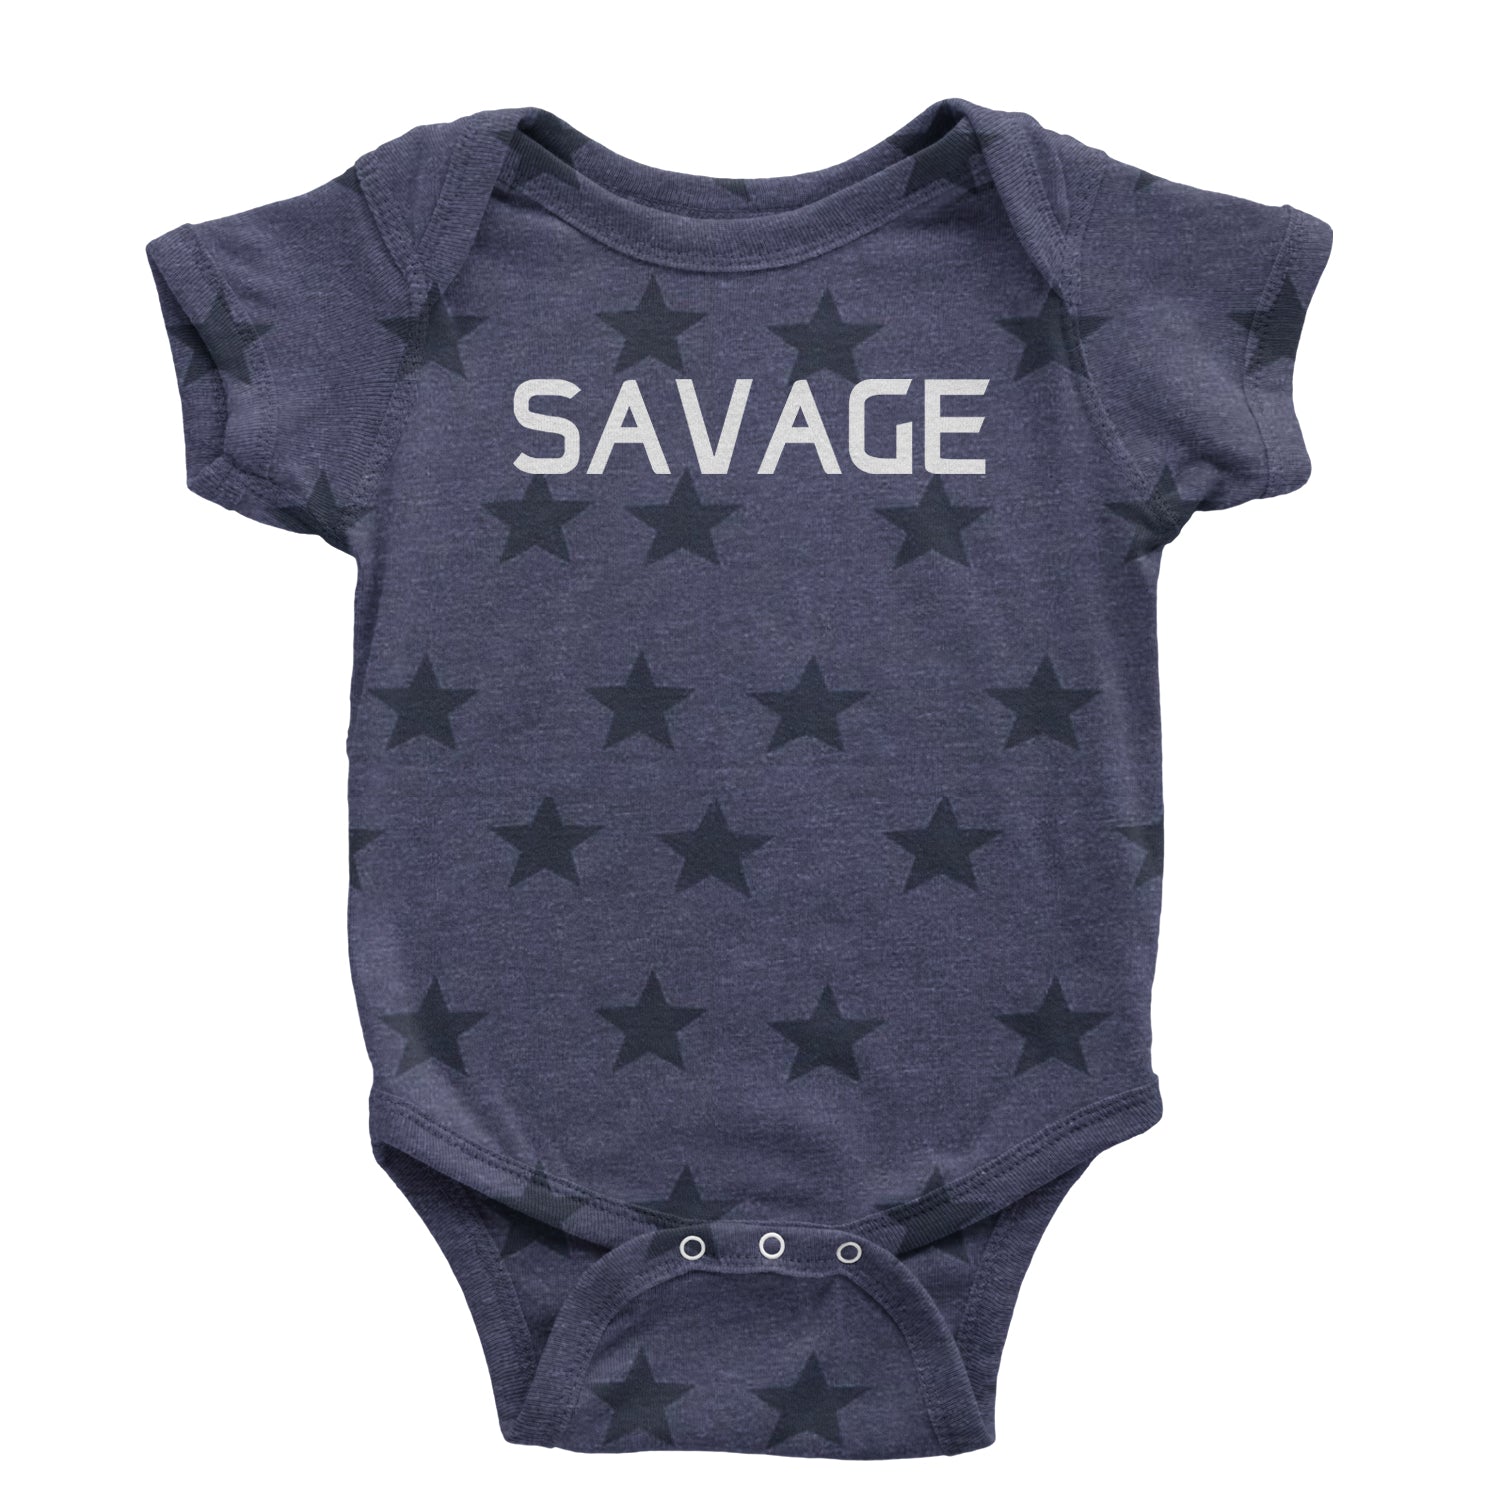 Savage Infant One-Piece Romper Bodysuit and Toddler T-shirt #expressiontees by Expression Tees